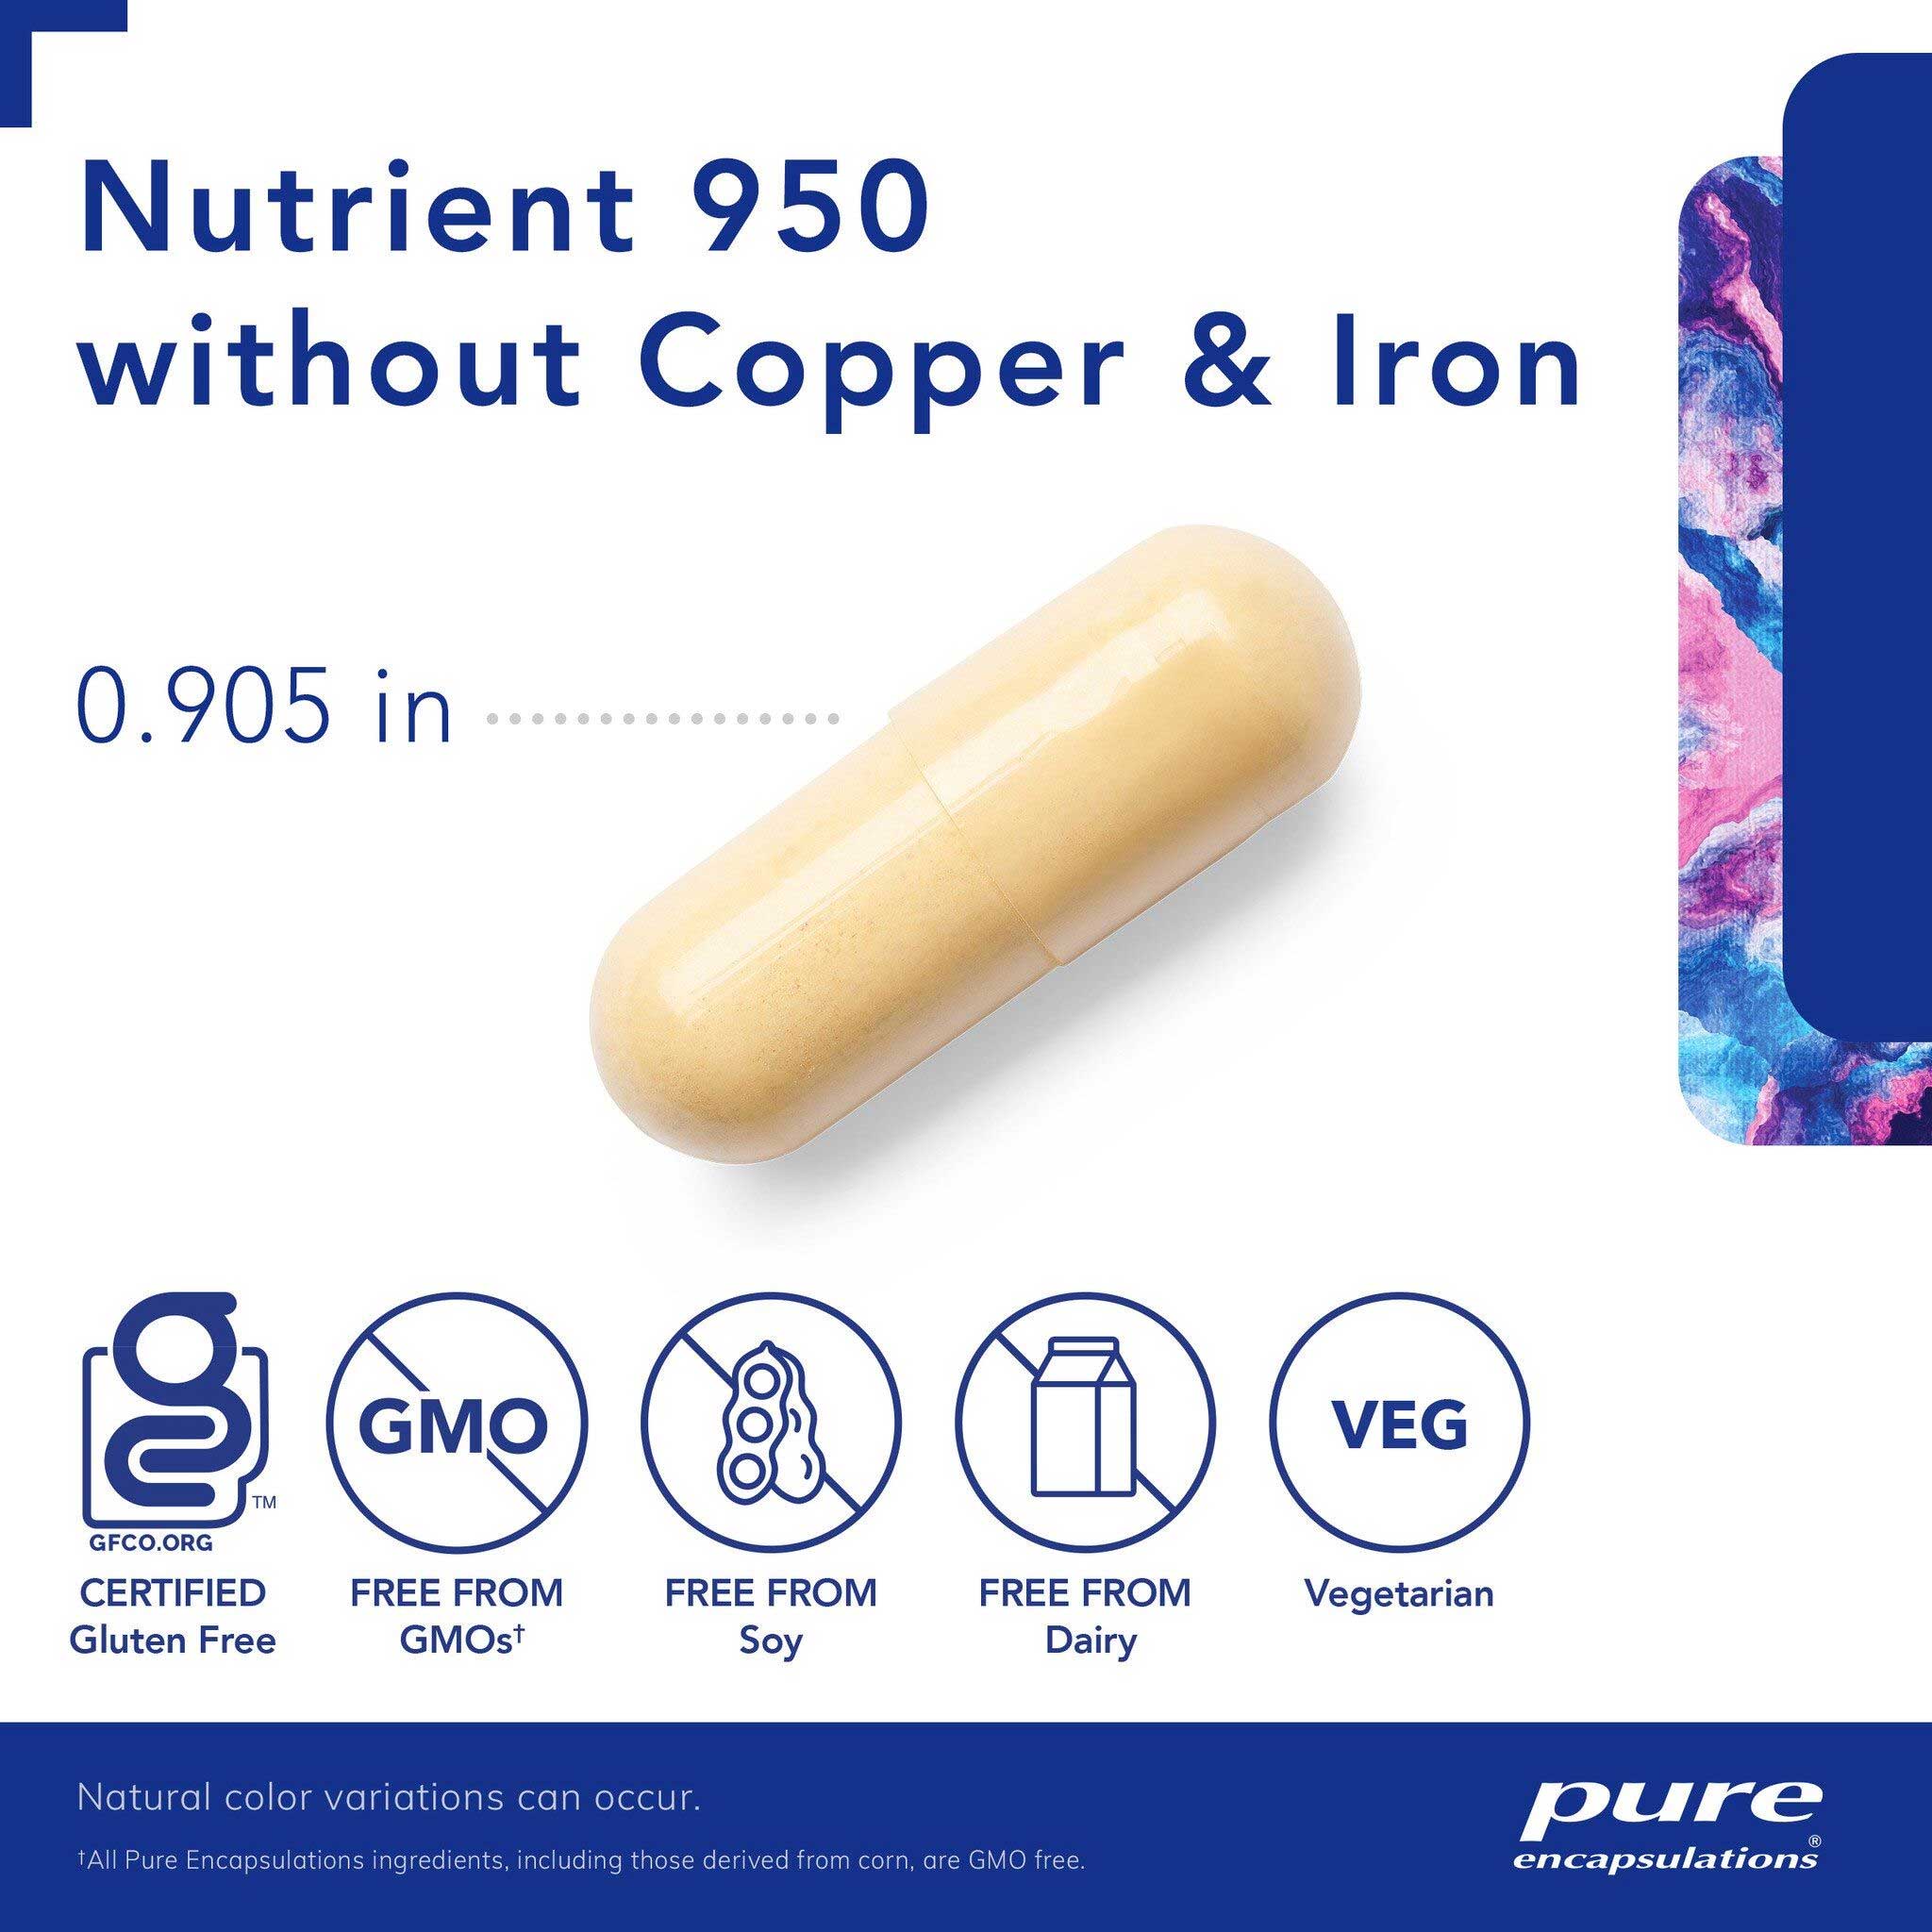 Pure Encapsulations Nutrient 950 without Copper & Iron Capsules